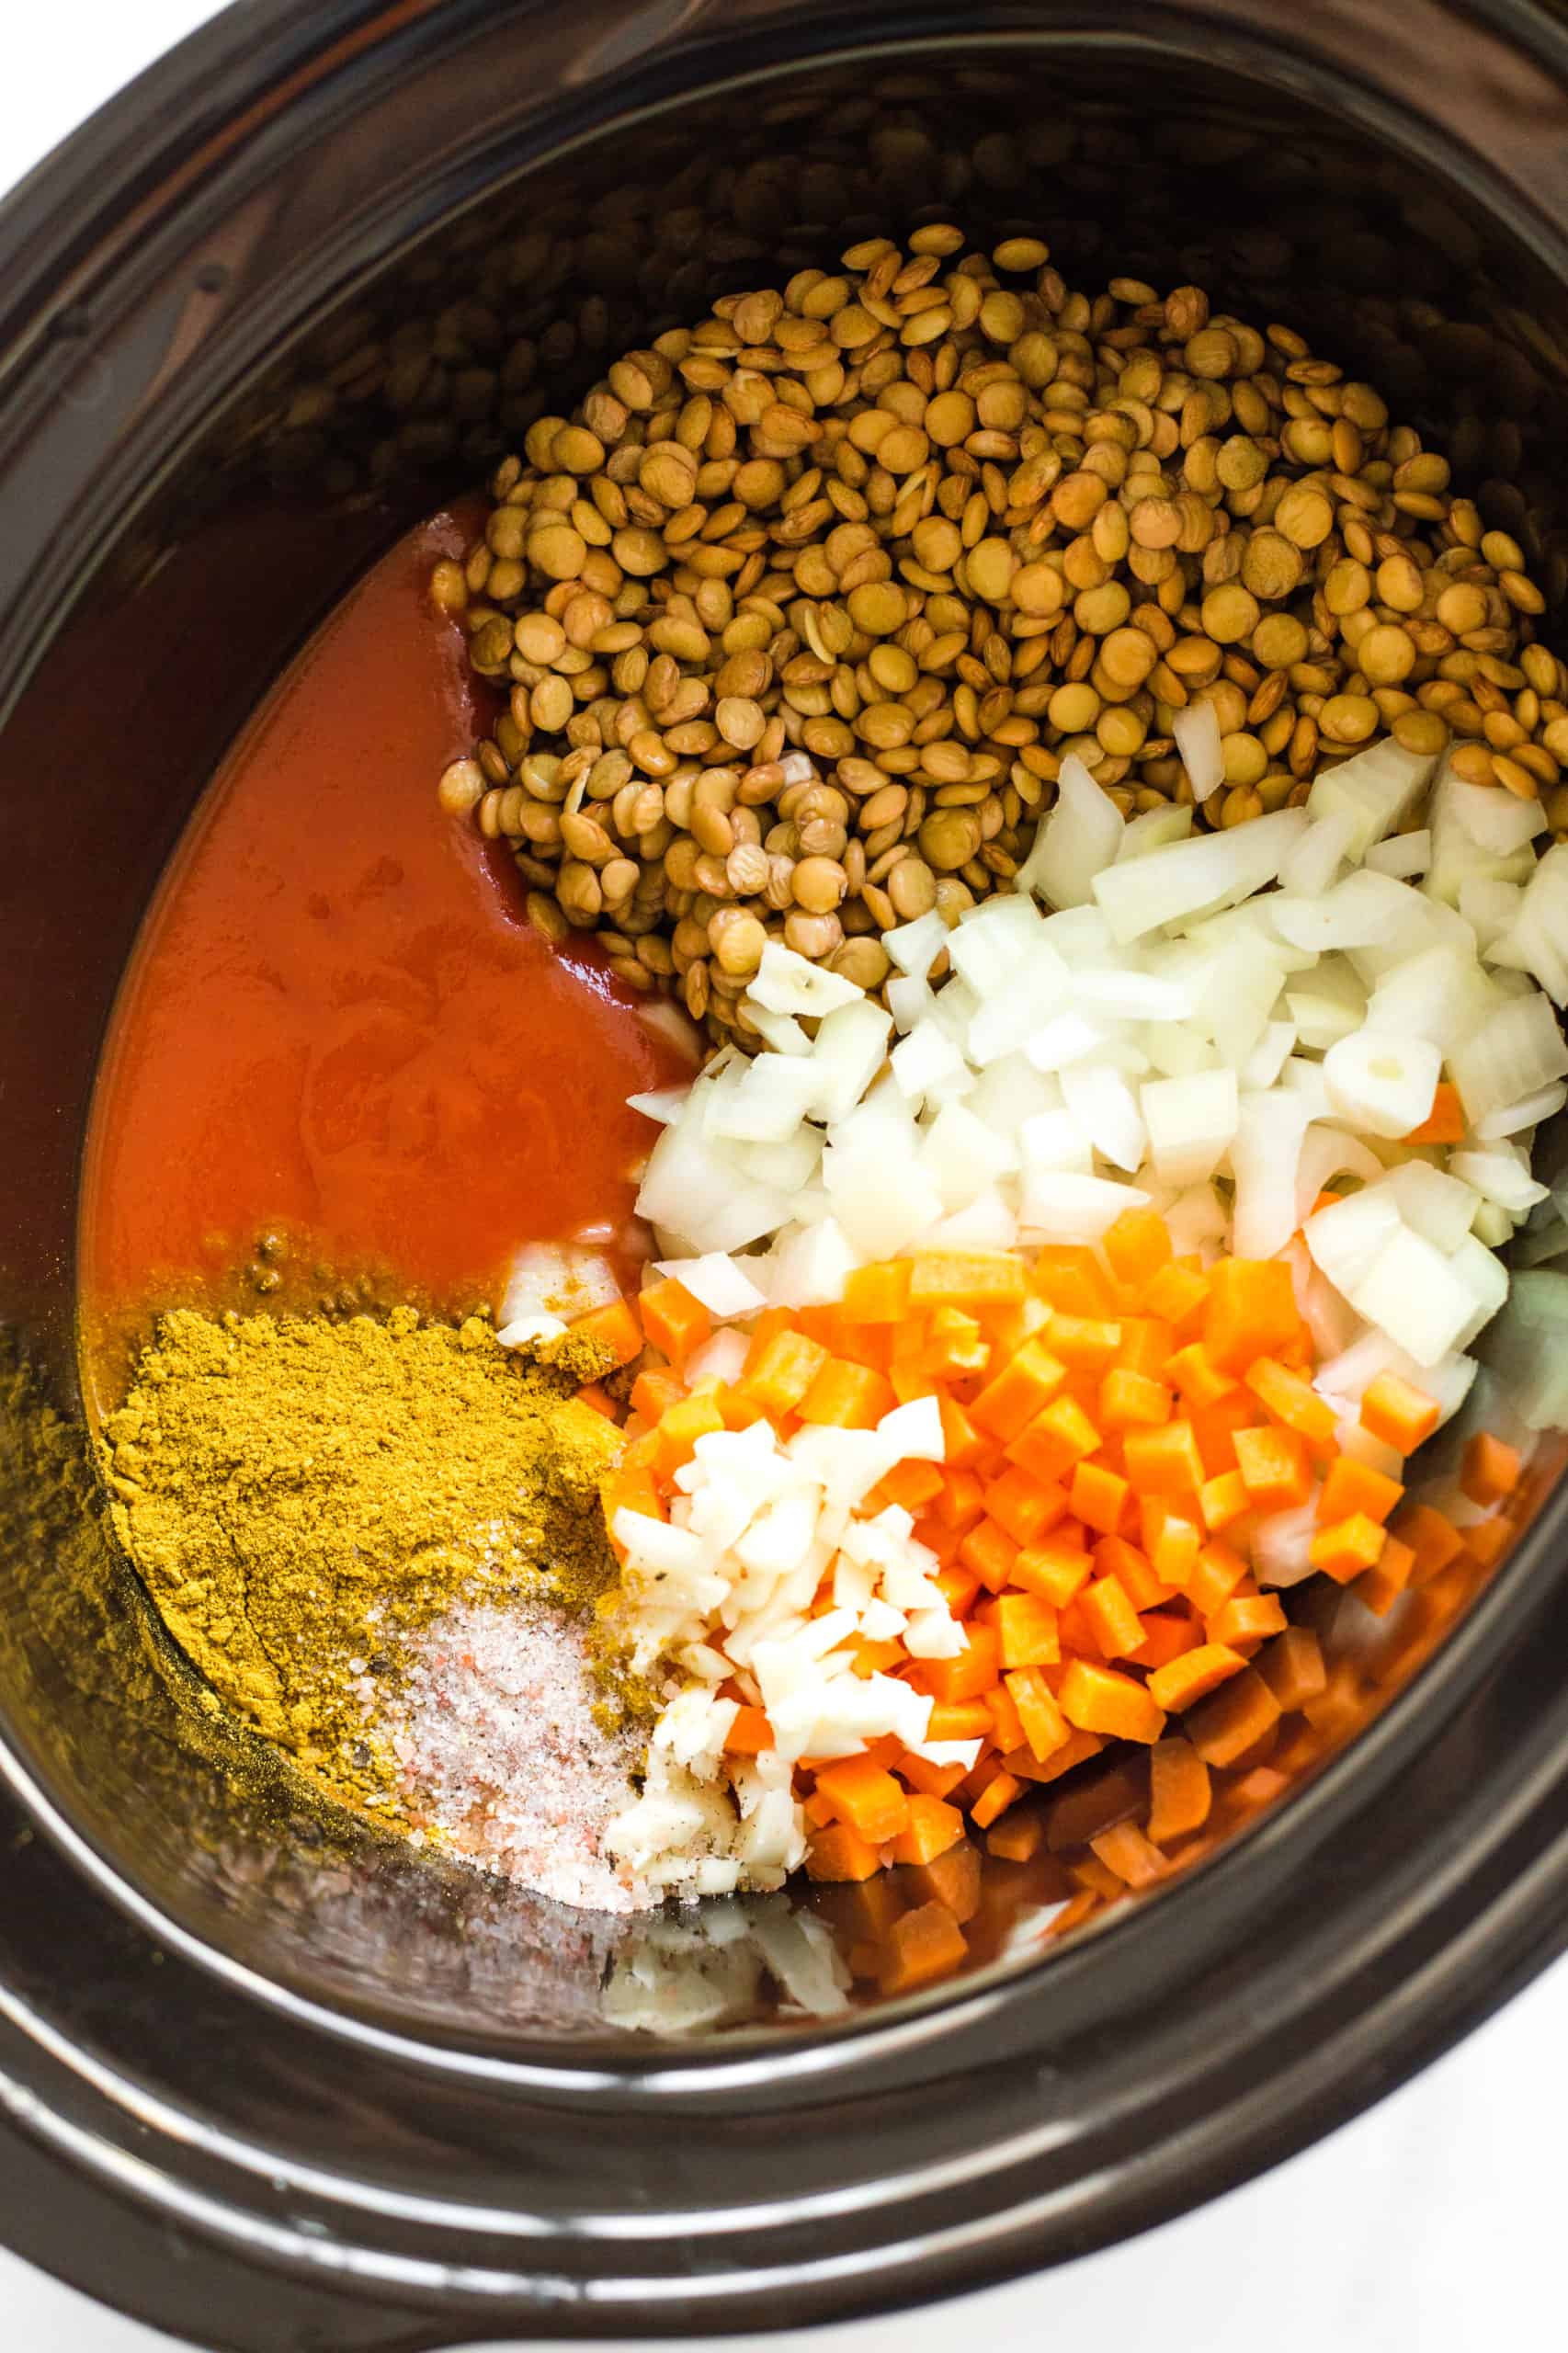 Lentil curry ingredients ready to cook in the slow cooker